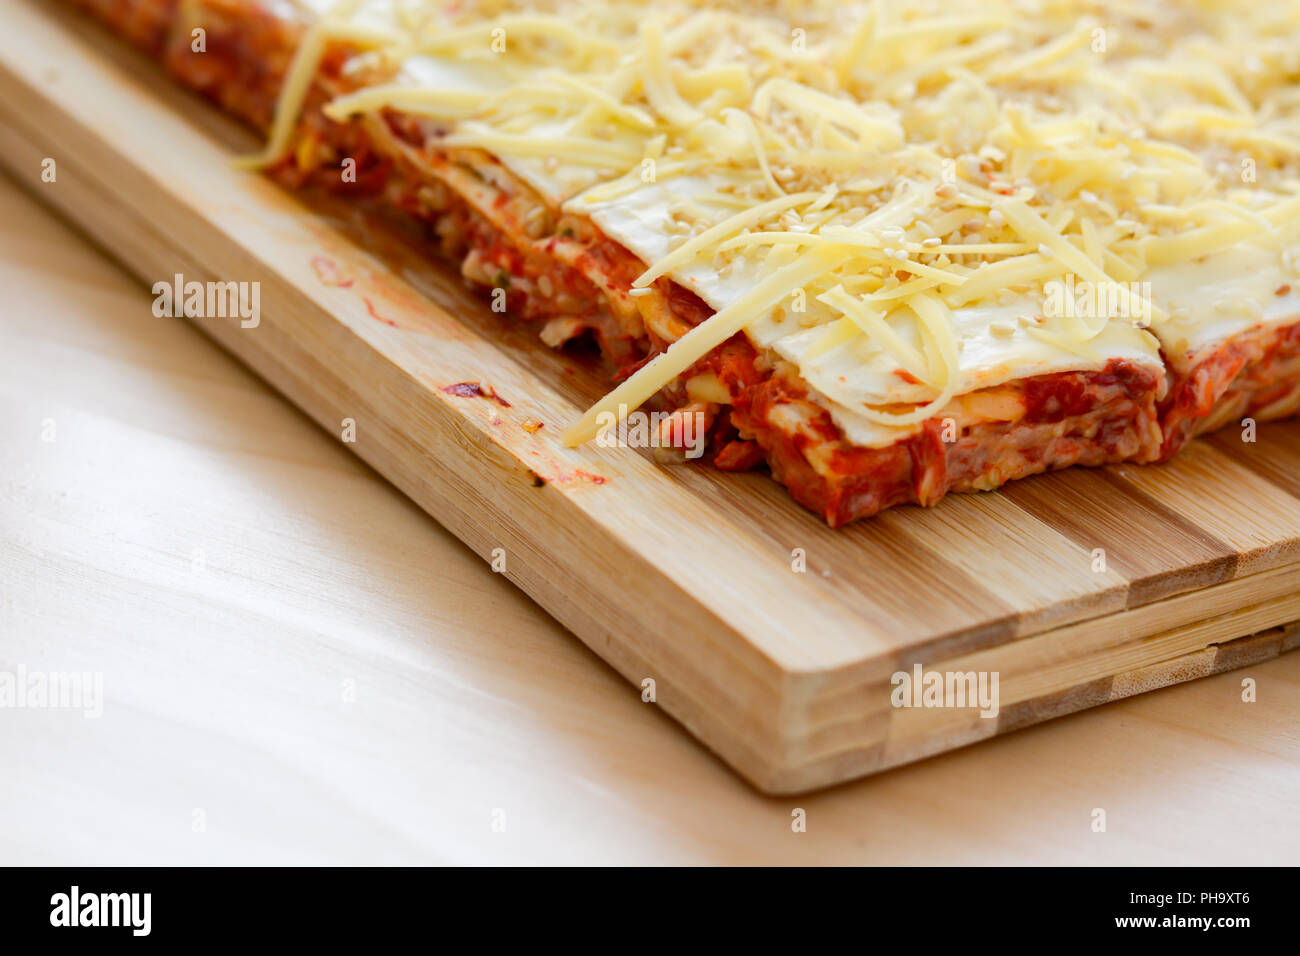 Salt cake with cheese and red paprika Stock Photo